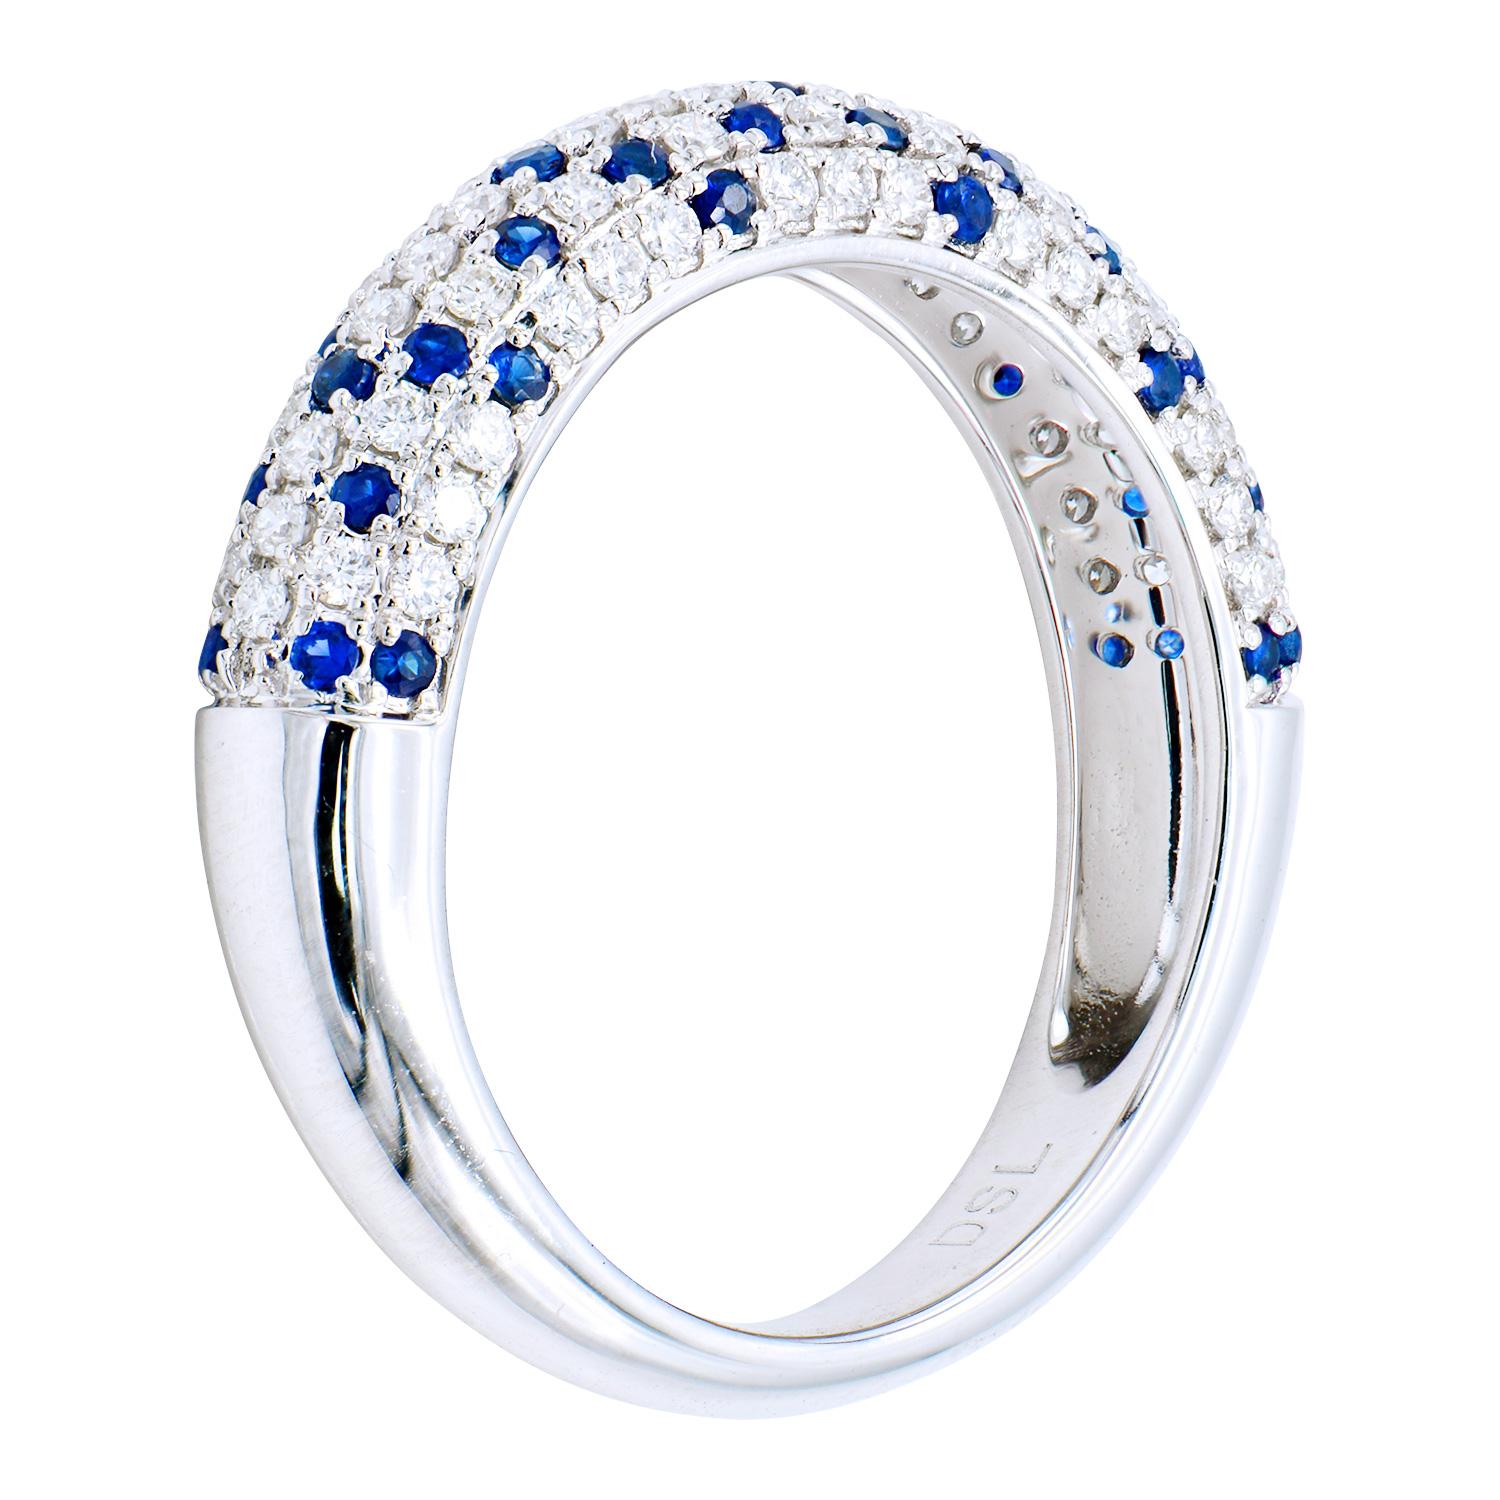 This unique ring has 5 rows of diamonds and sapphires that go halfway around the ring. Between all the rows there are 41 sapphires and 70 round diamonds, each row having its own pattern. The sapphires total 0.26 carats and the diamonds are VS2, G